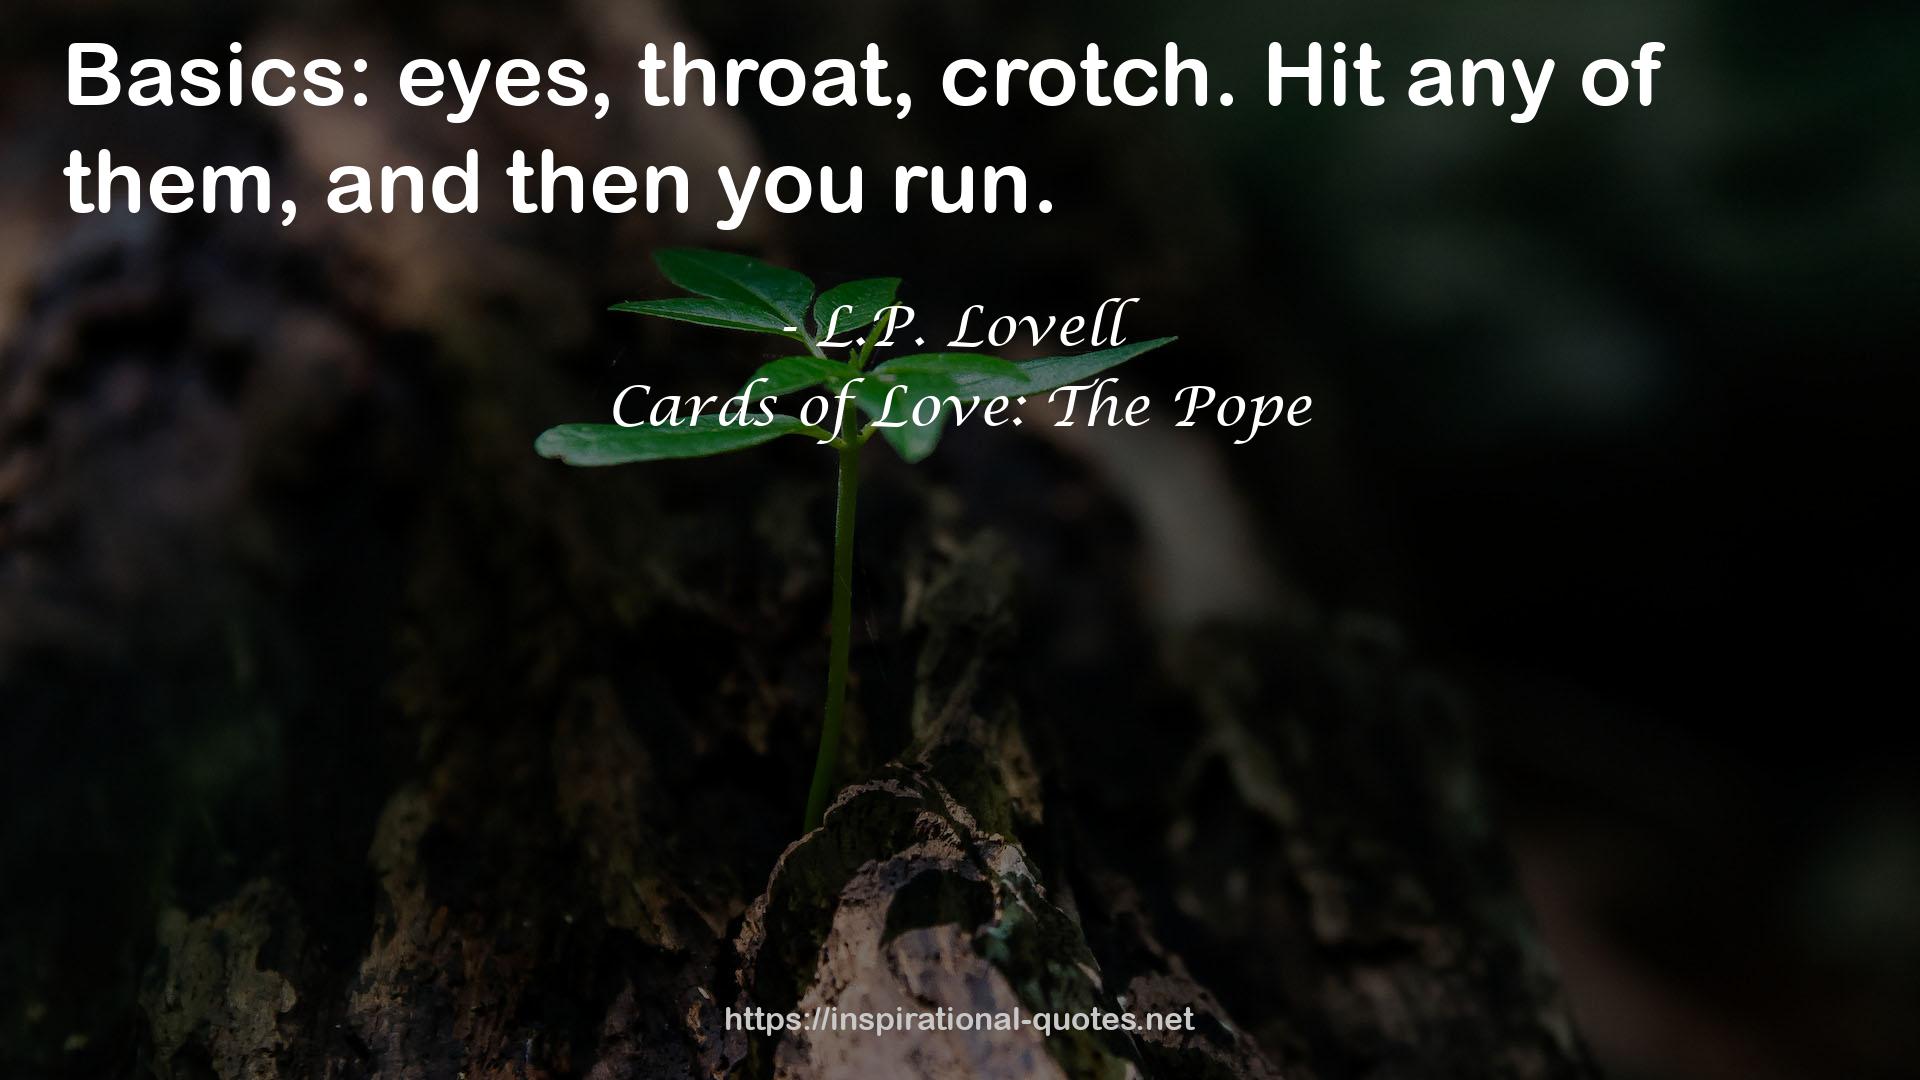 Cards of Love: The Pope QUOTES